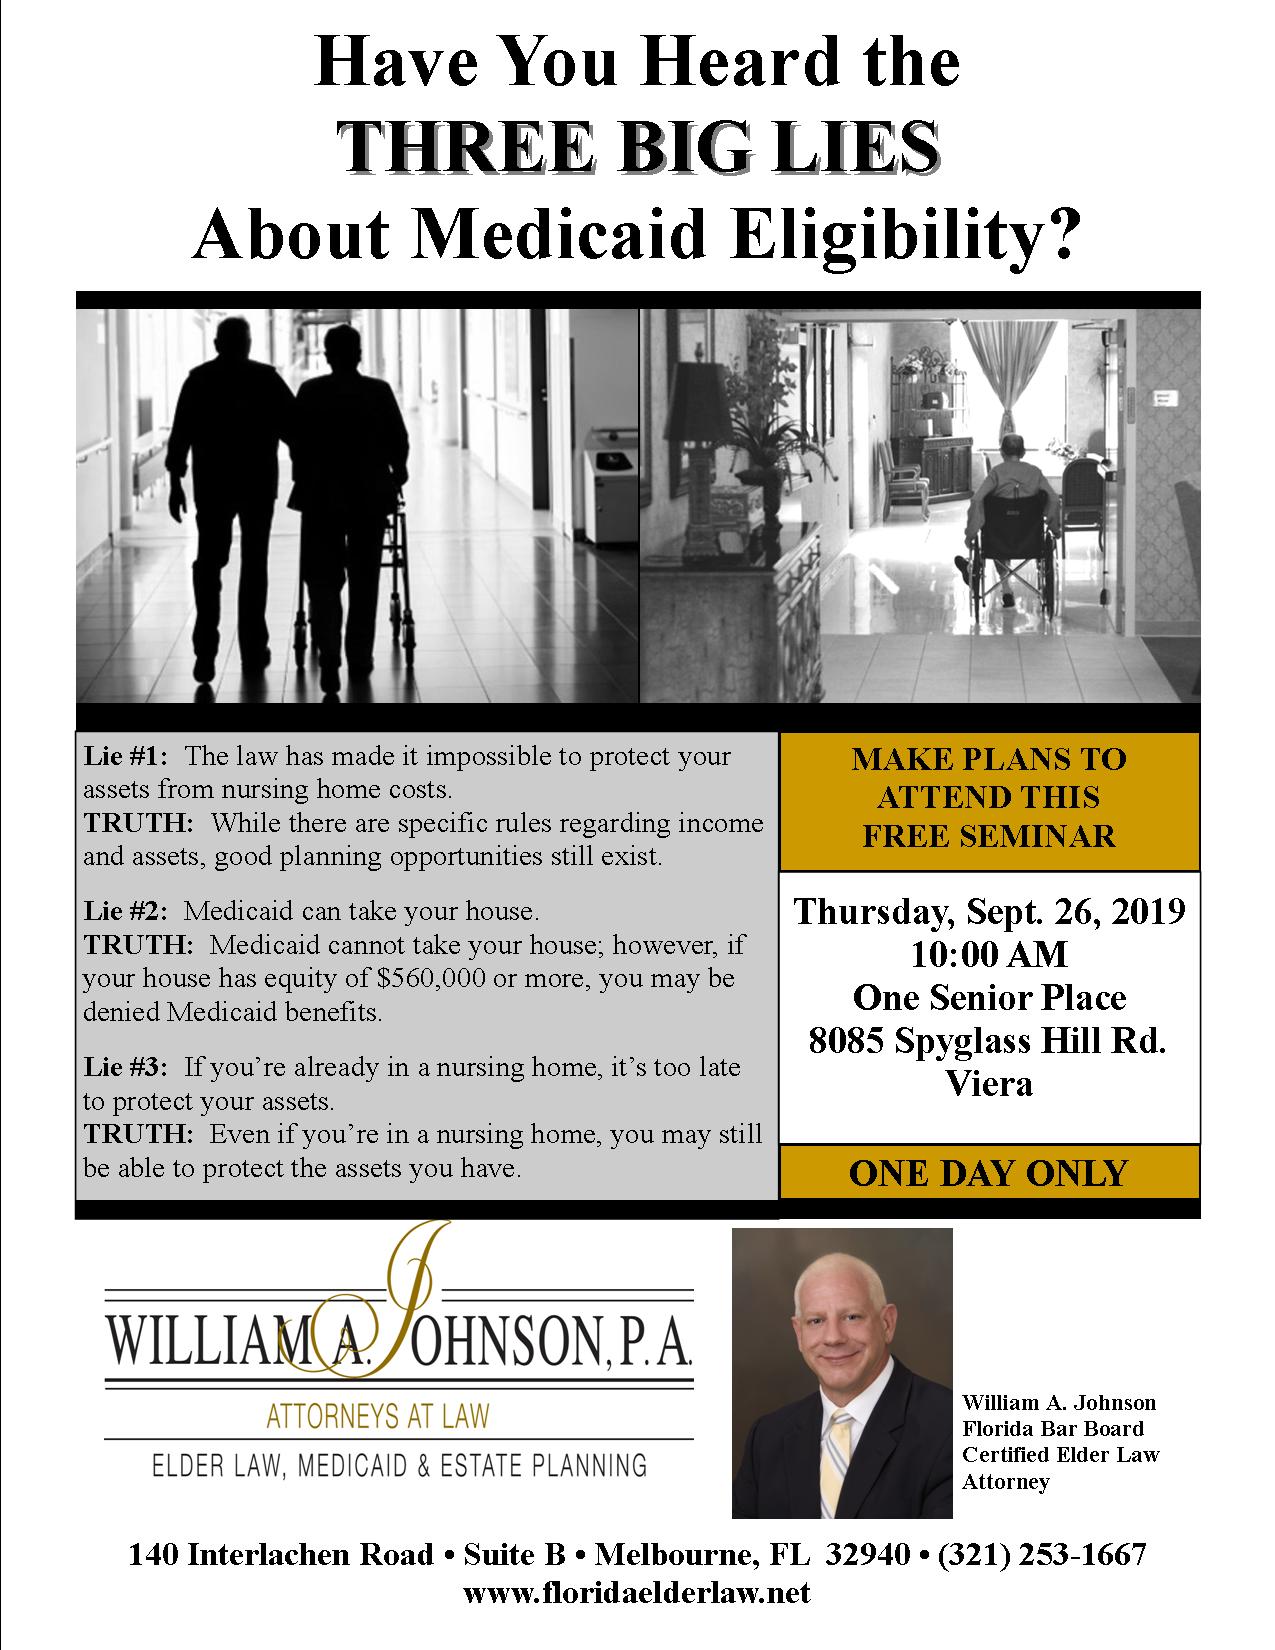 Have You Heard the THREE BIG LIES About Medicaid Eligibility? presented by William A. Johnson, P.A.